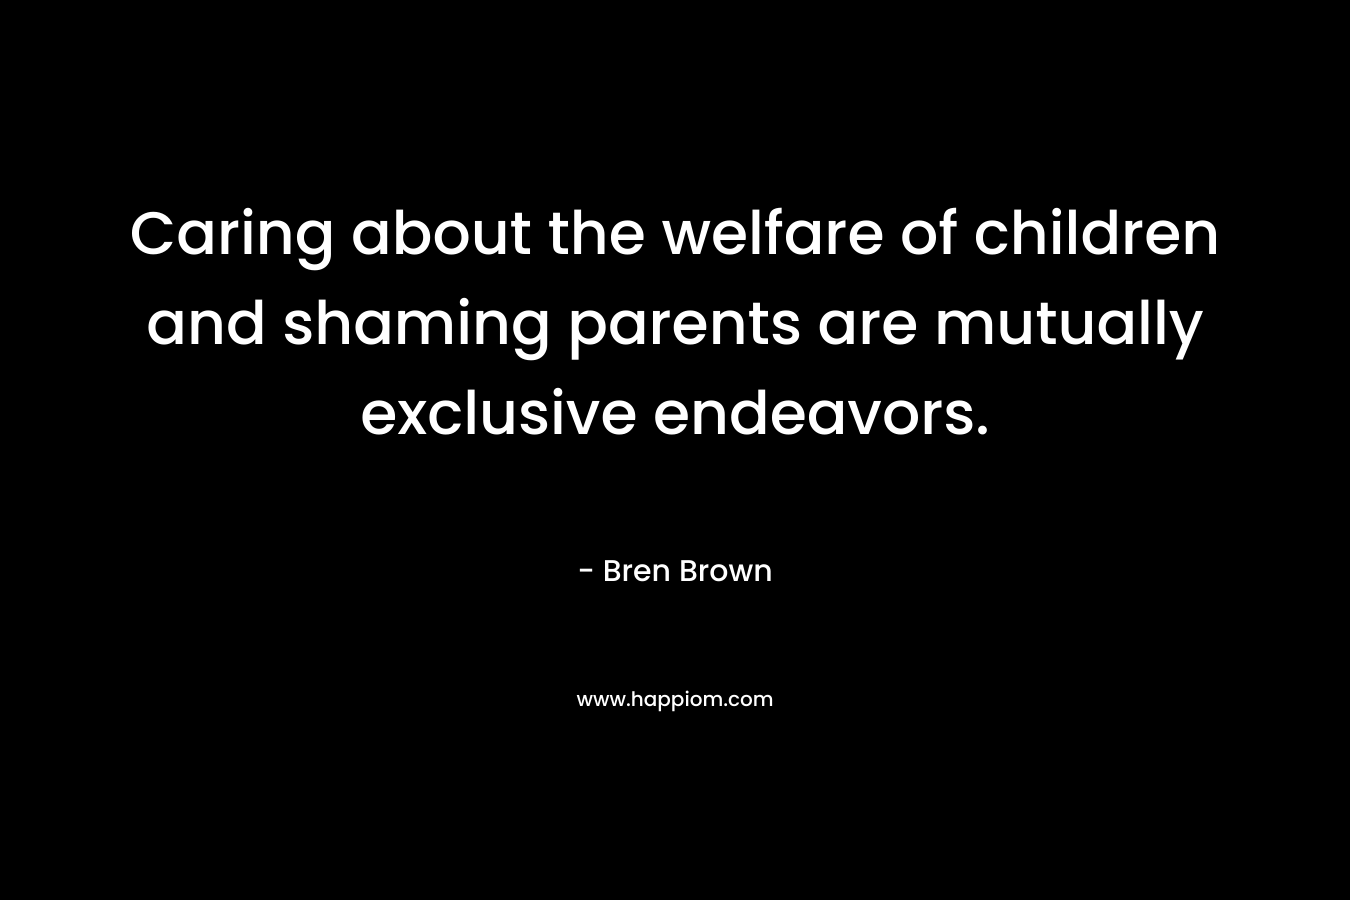 Caring about the welfare of children and shaming parents are mutually exclusive endeavors.